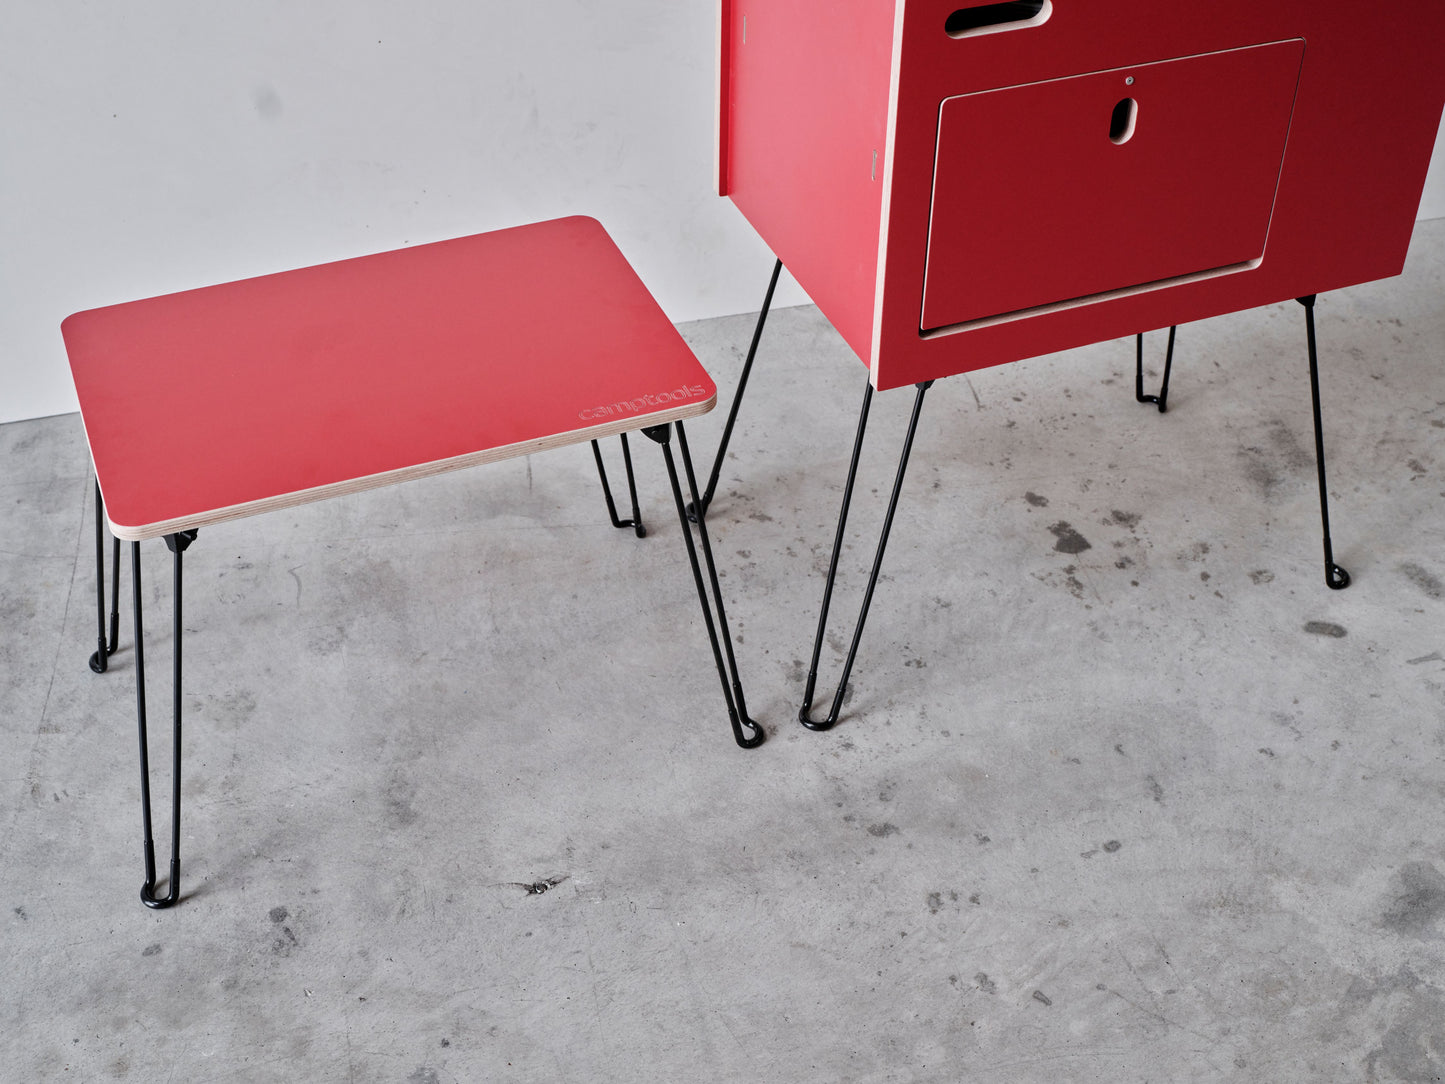 Additional table for the CoBo kitchen module